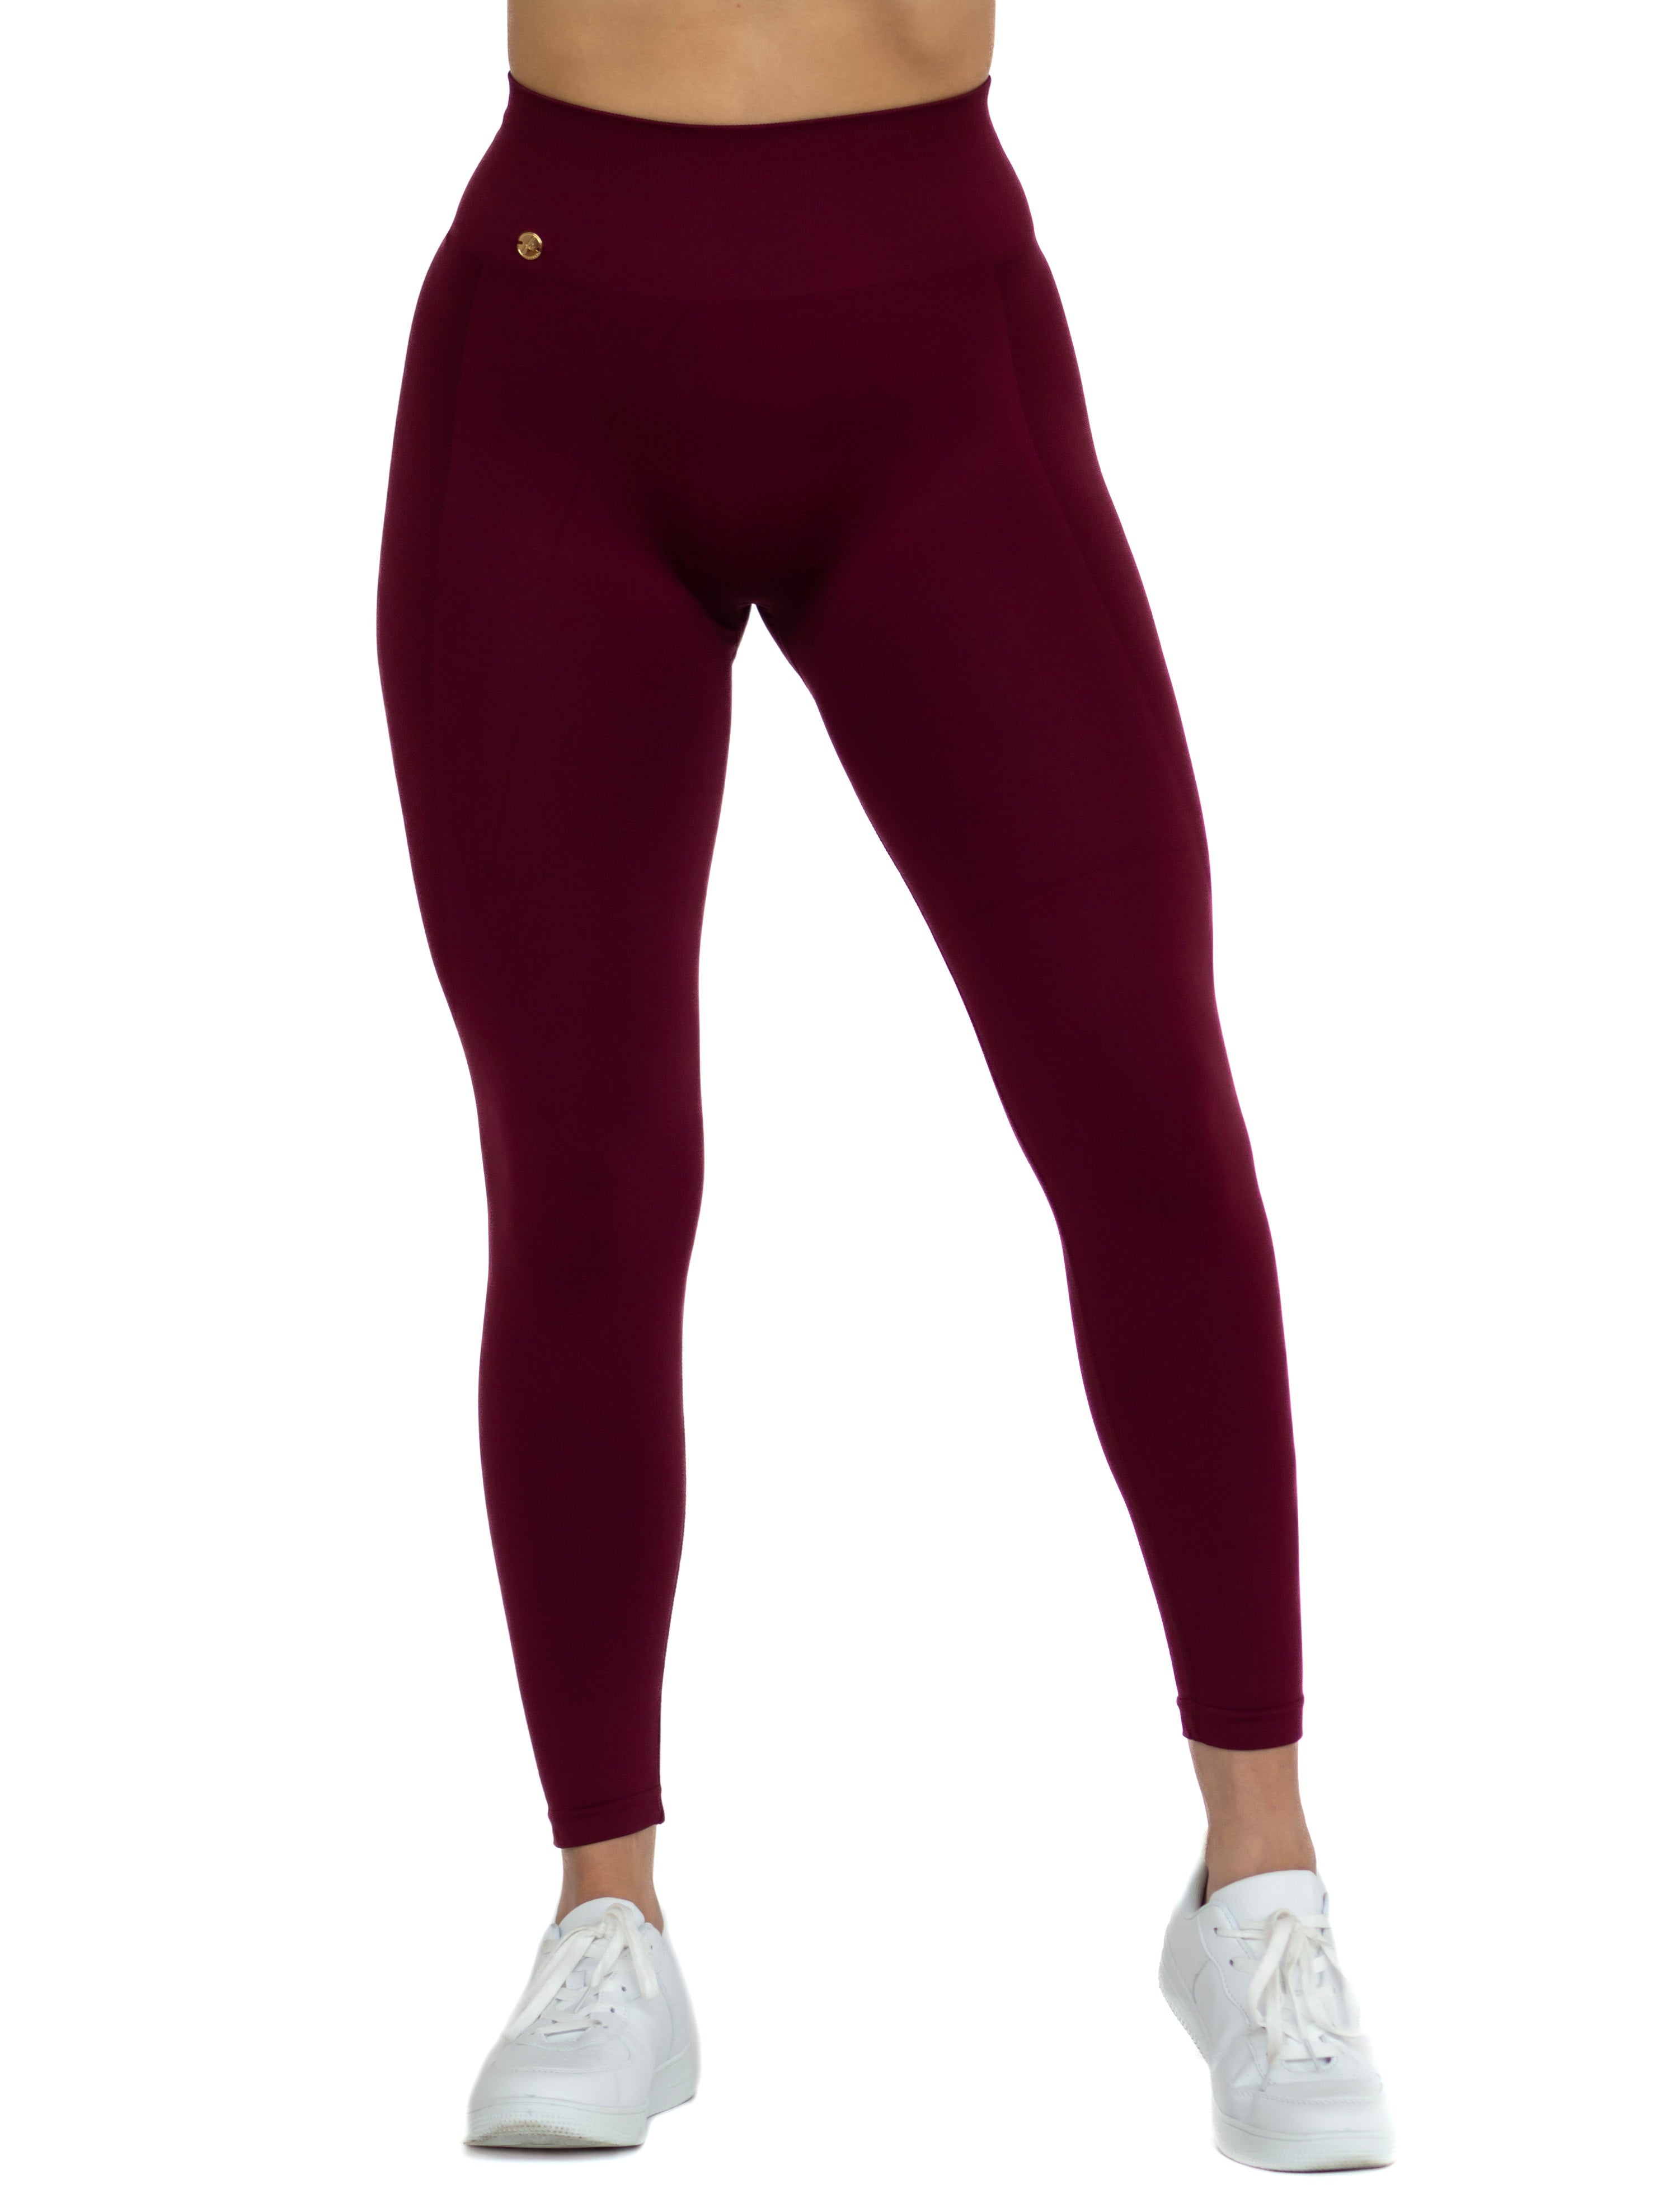 Passion Tights - Cherry